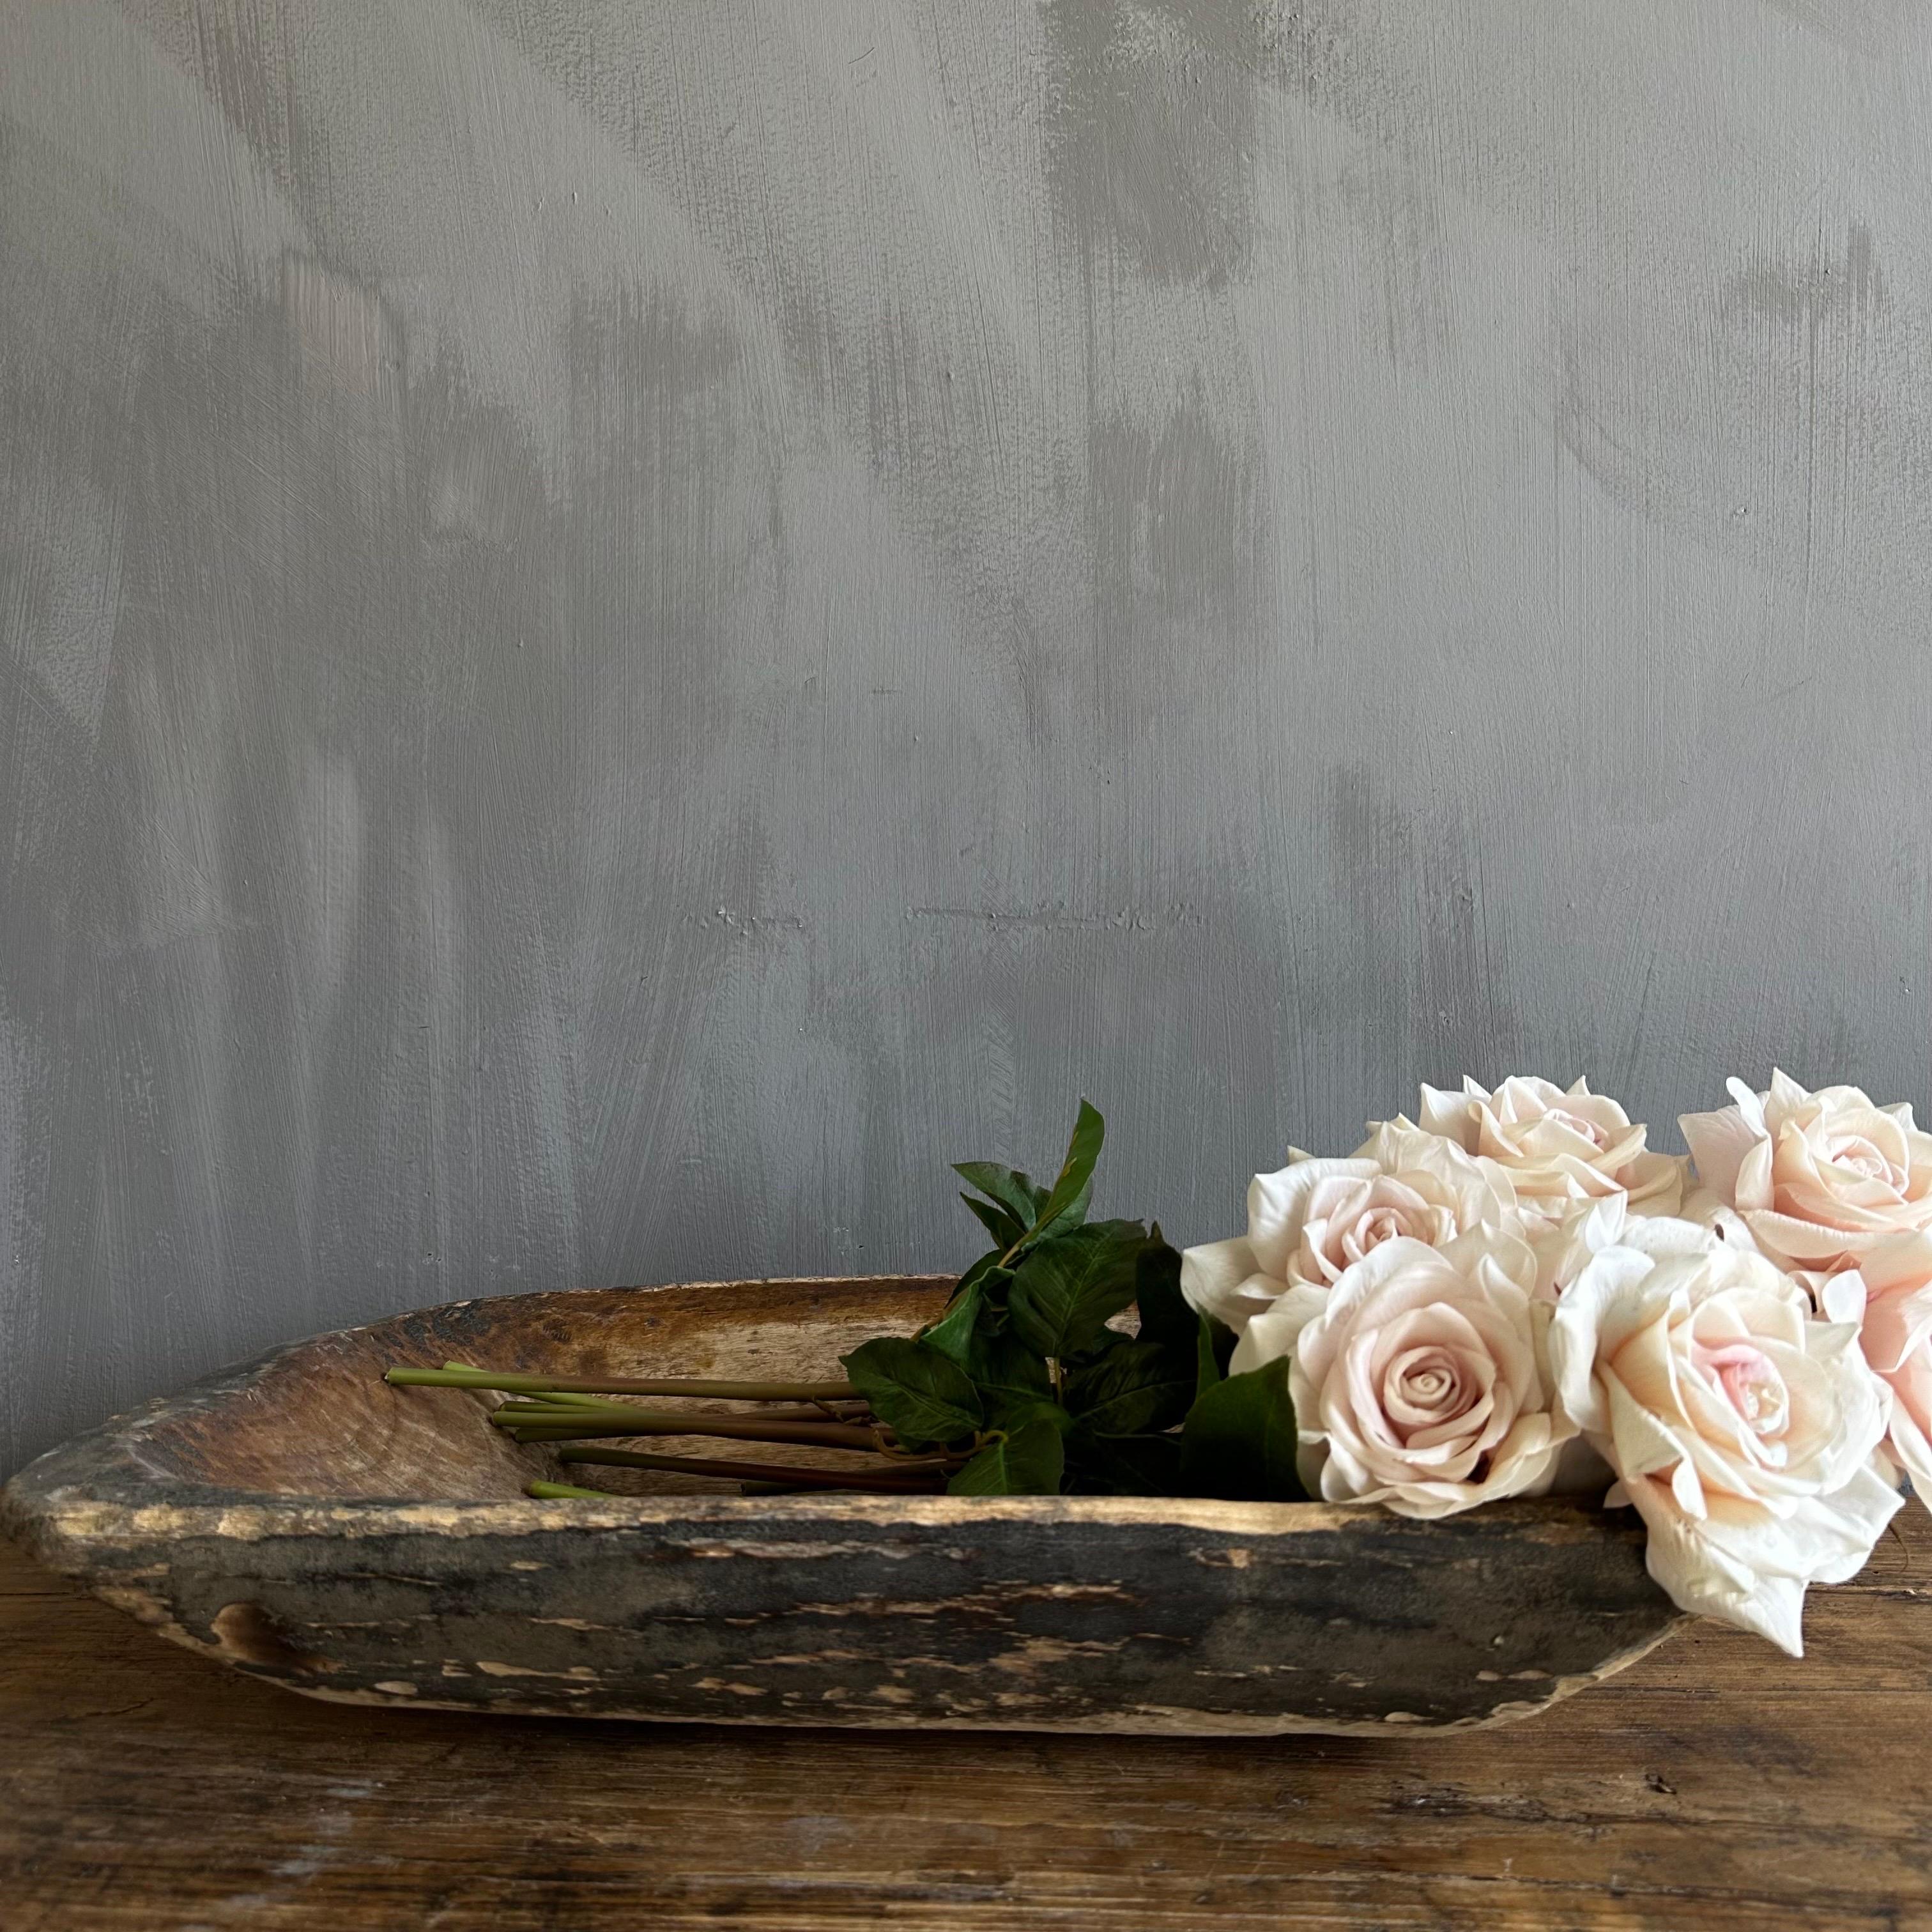 Vintage Wood Trough Decorative Bowl
A beautiful wood trough with a natural patina. Can be used on a dining table or server for decoration.
Wood is natural with patina. Some troughs will have decorative metal on or around the bowl, please view the